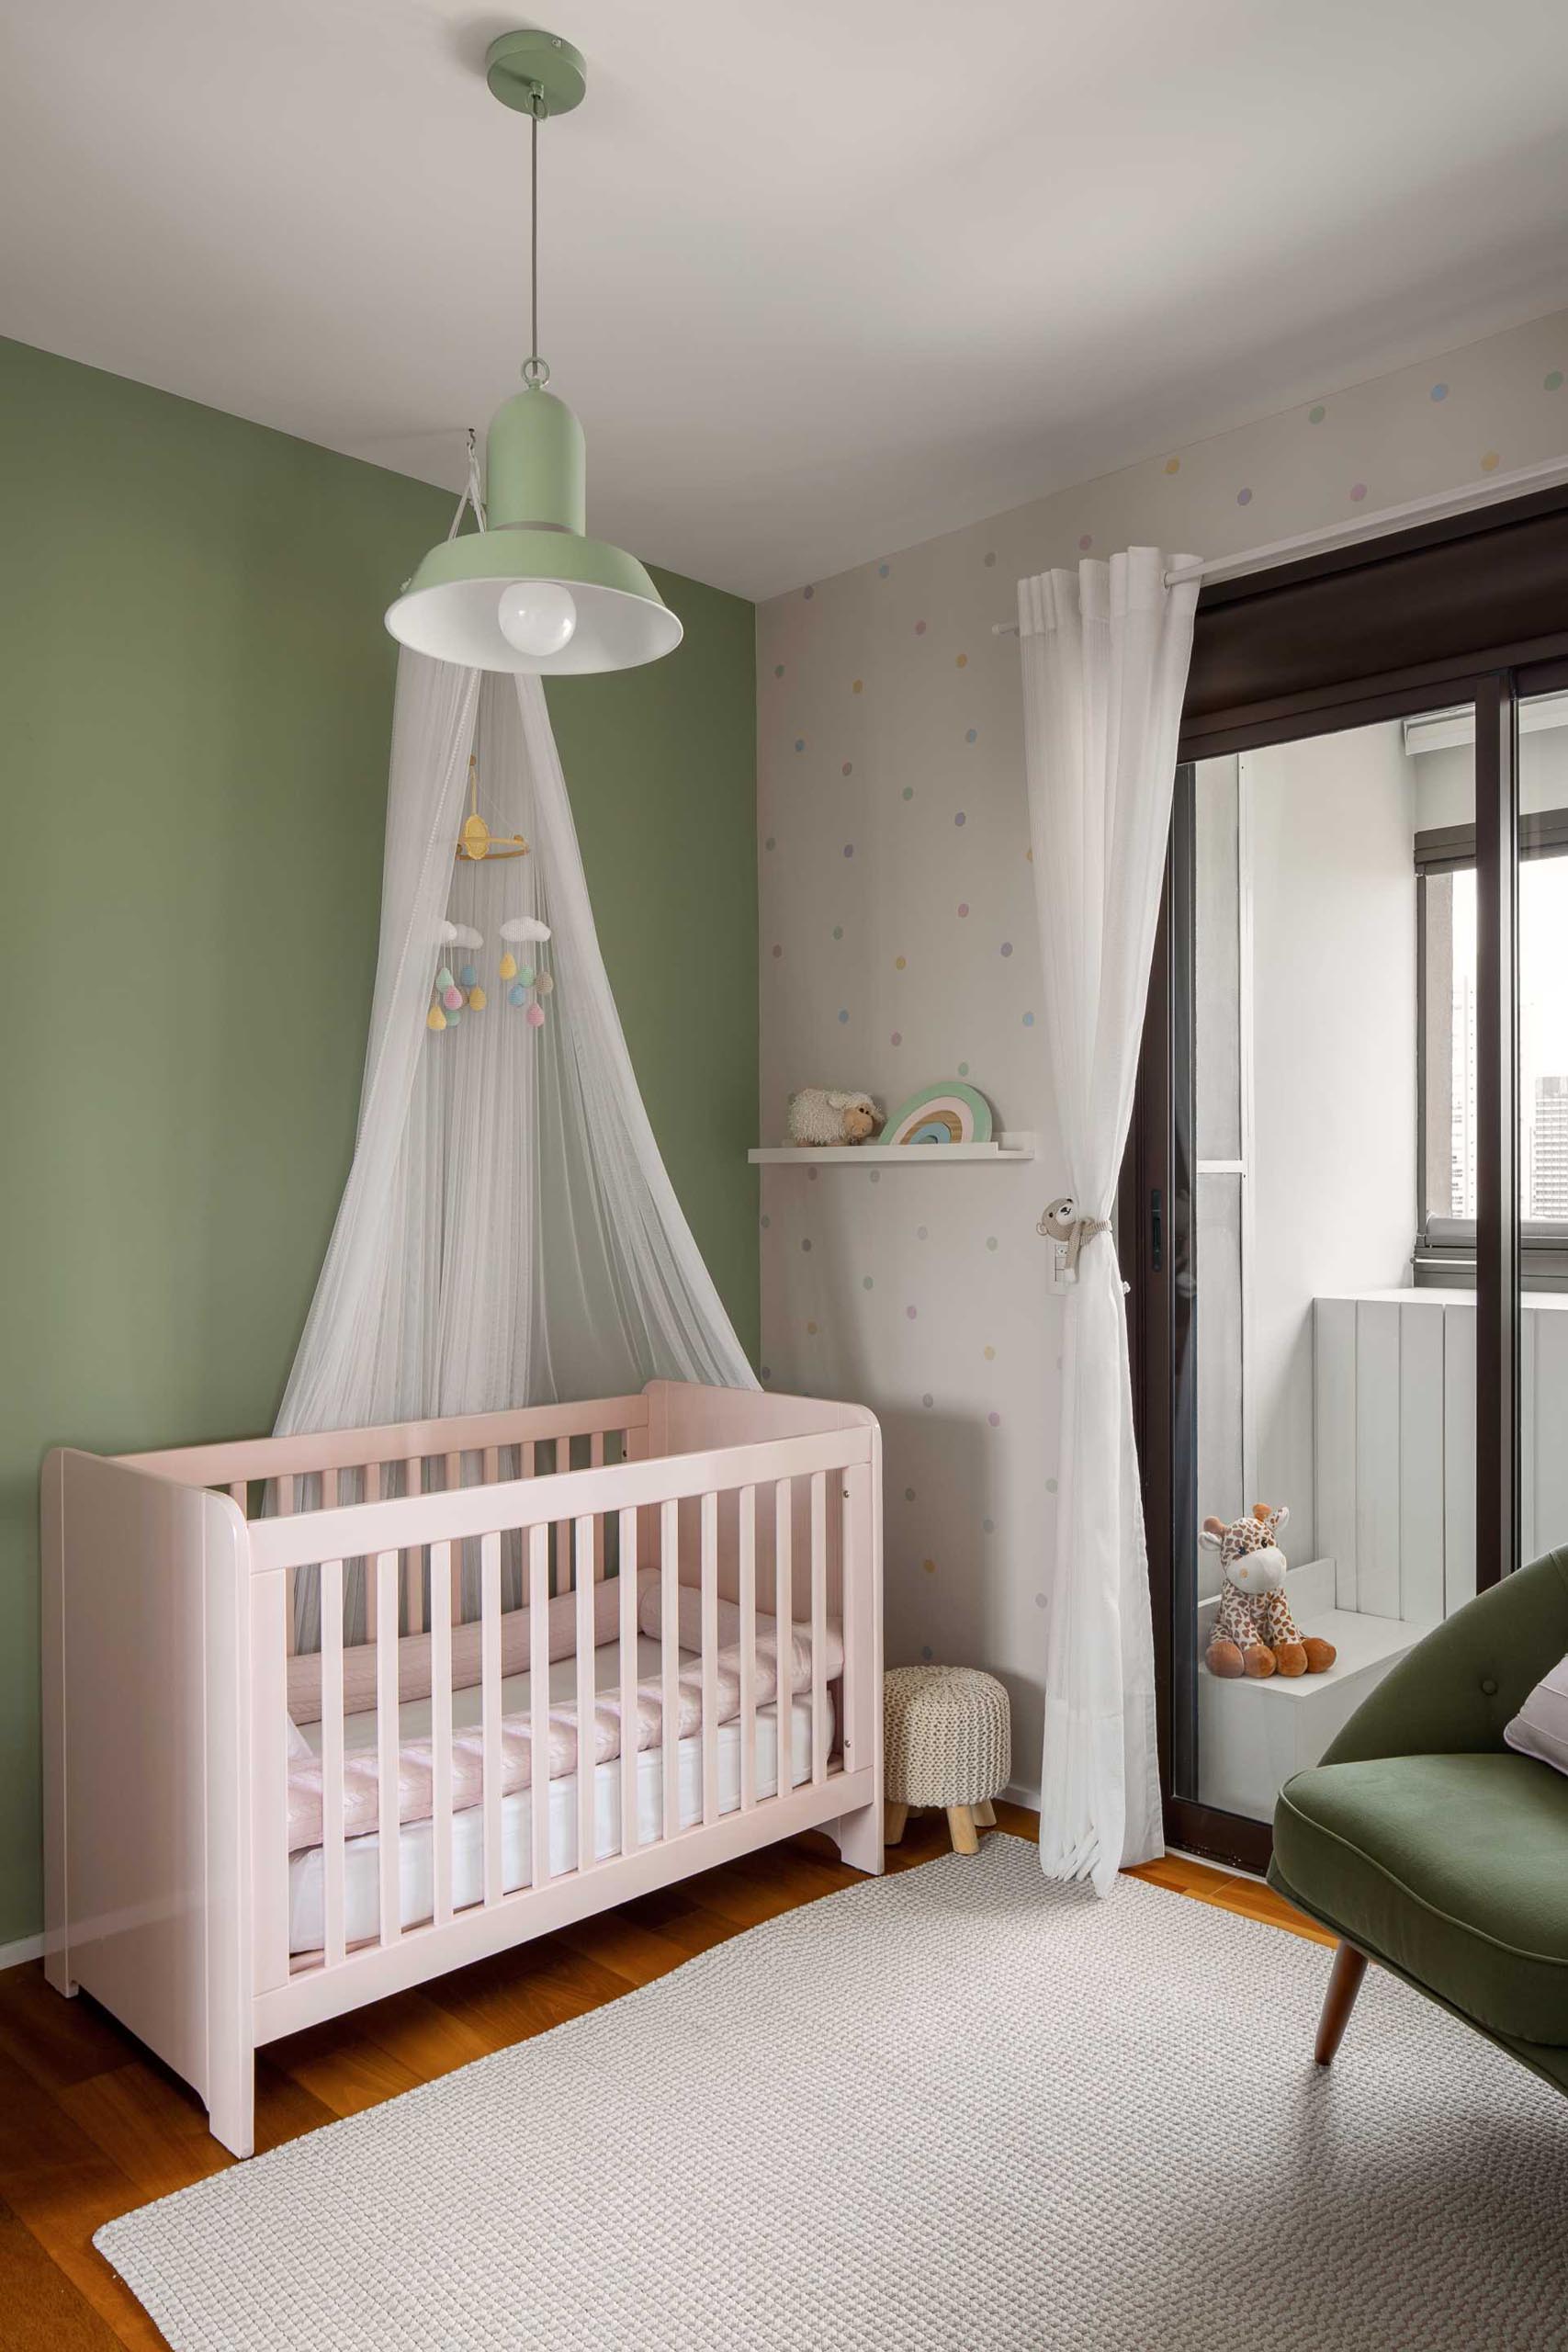 A modern nursery with a light green accent wall that stands out against pale pink crib.